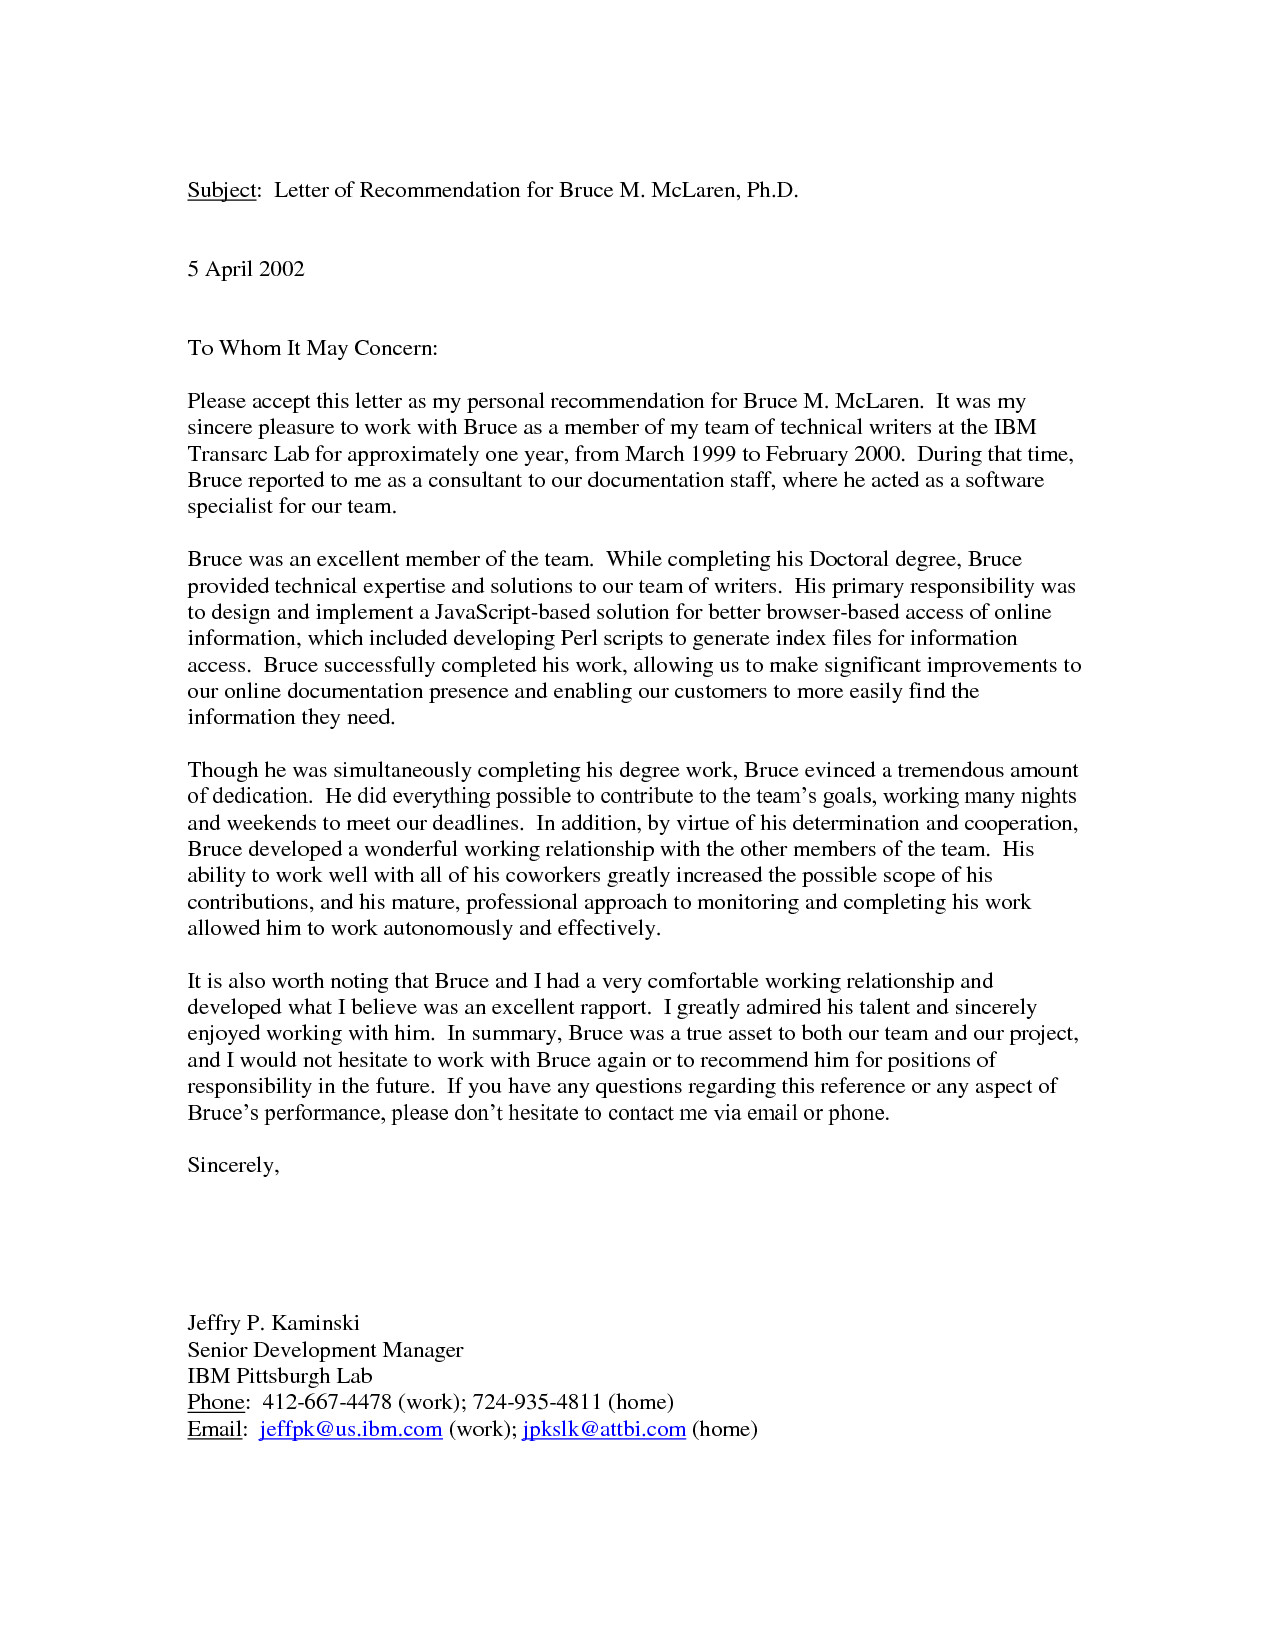 Personal Recommendation Letter Template Personal Letter Re Mendation